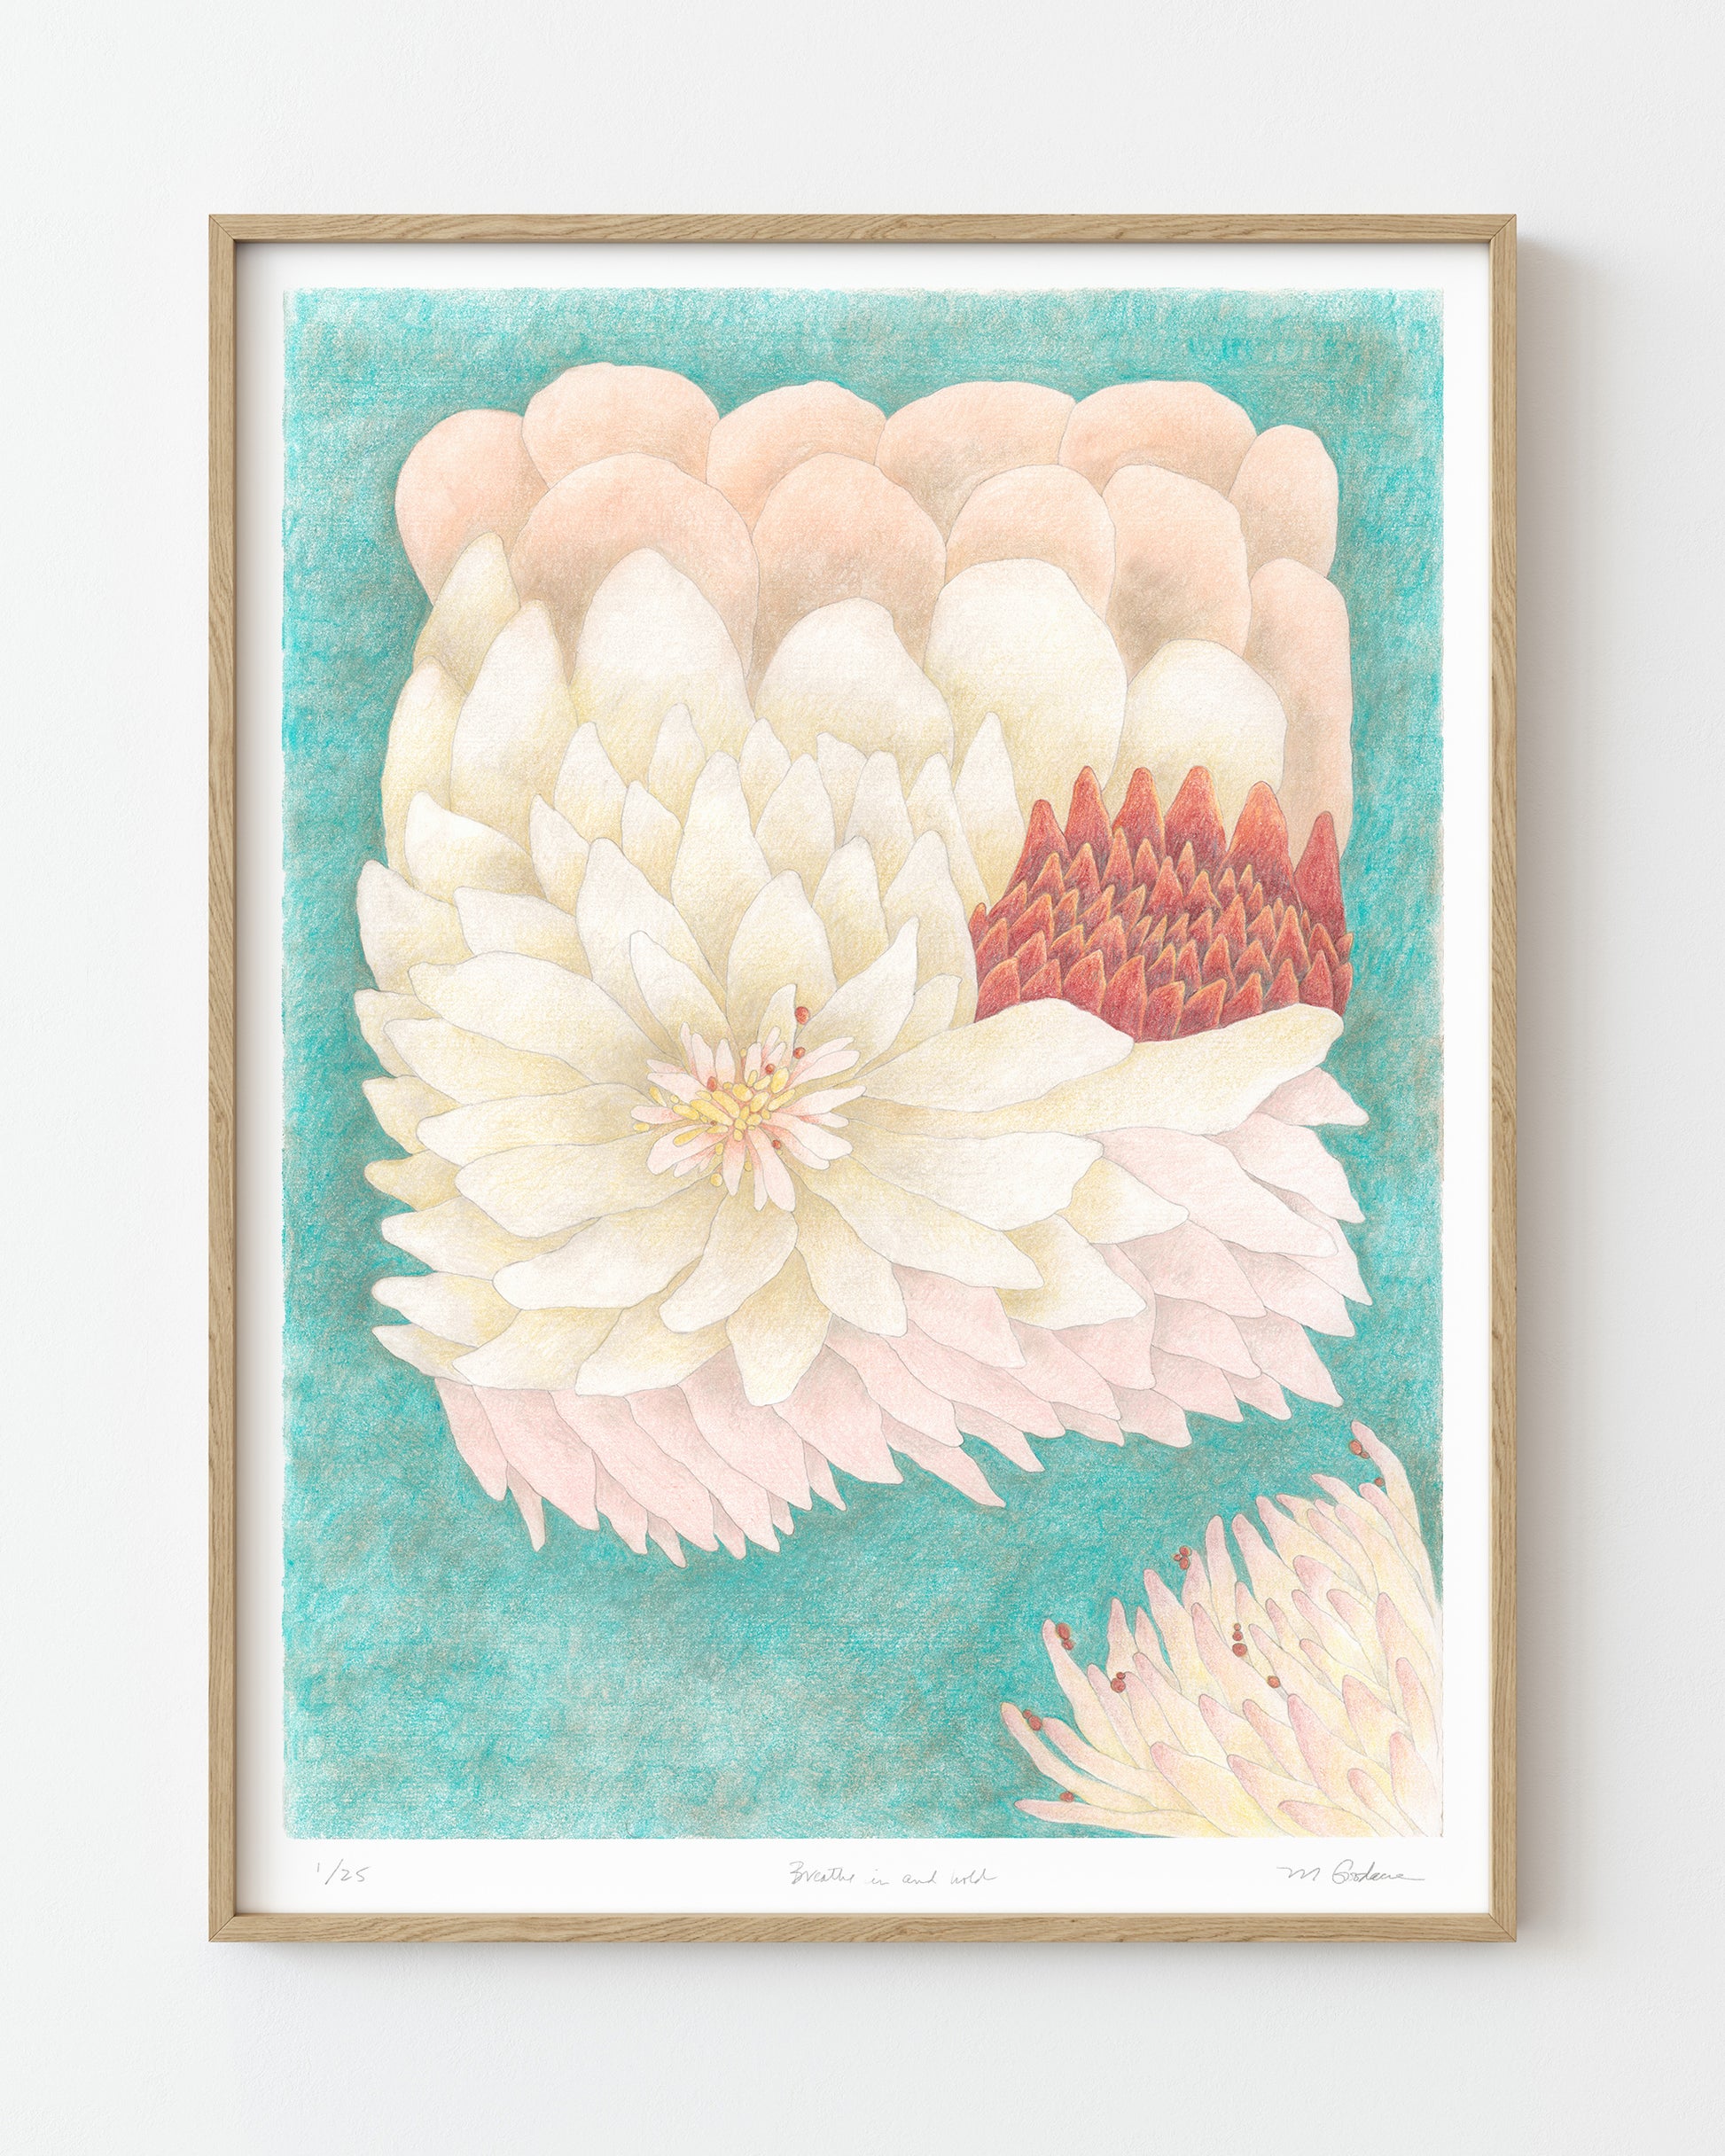 Framed surreal drawing of a large flower floating on a teal background.